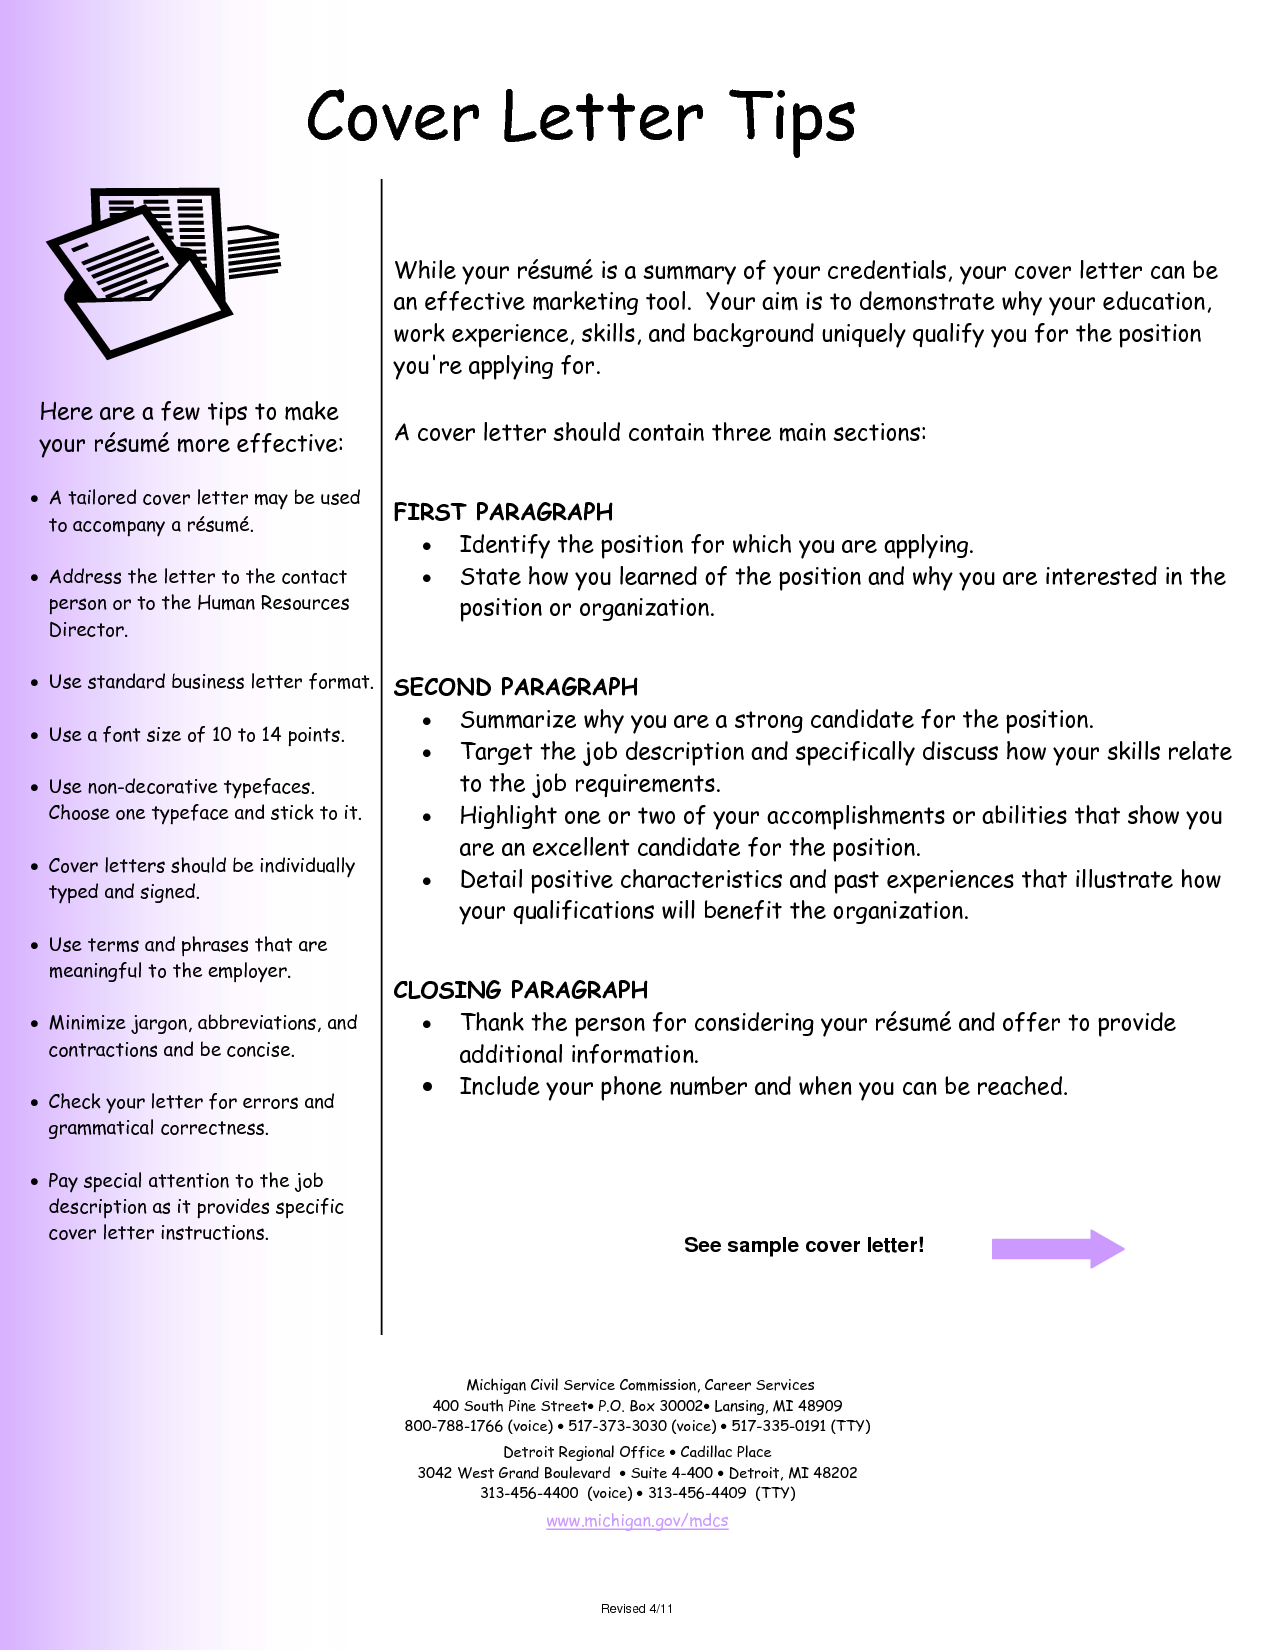 Resume Cover Letter Examples | Fotolip.com Rich image and wallpaper